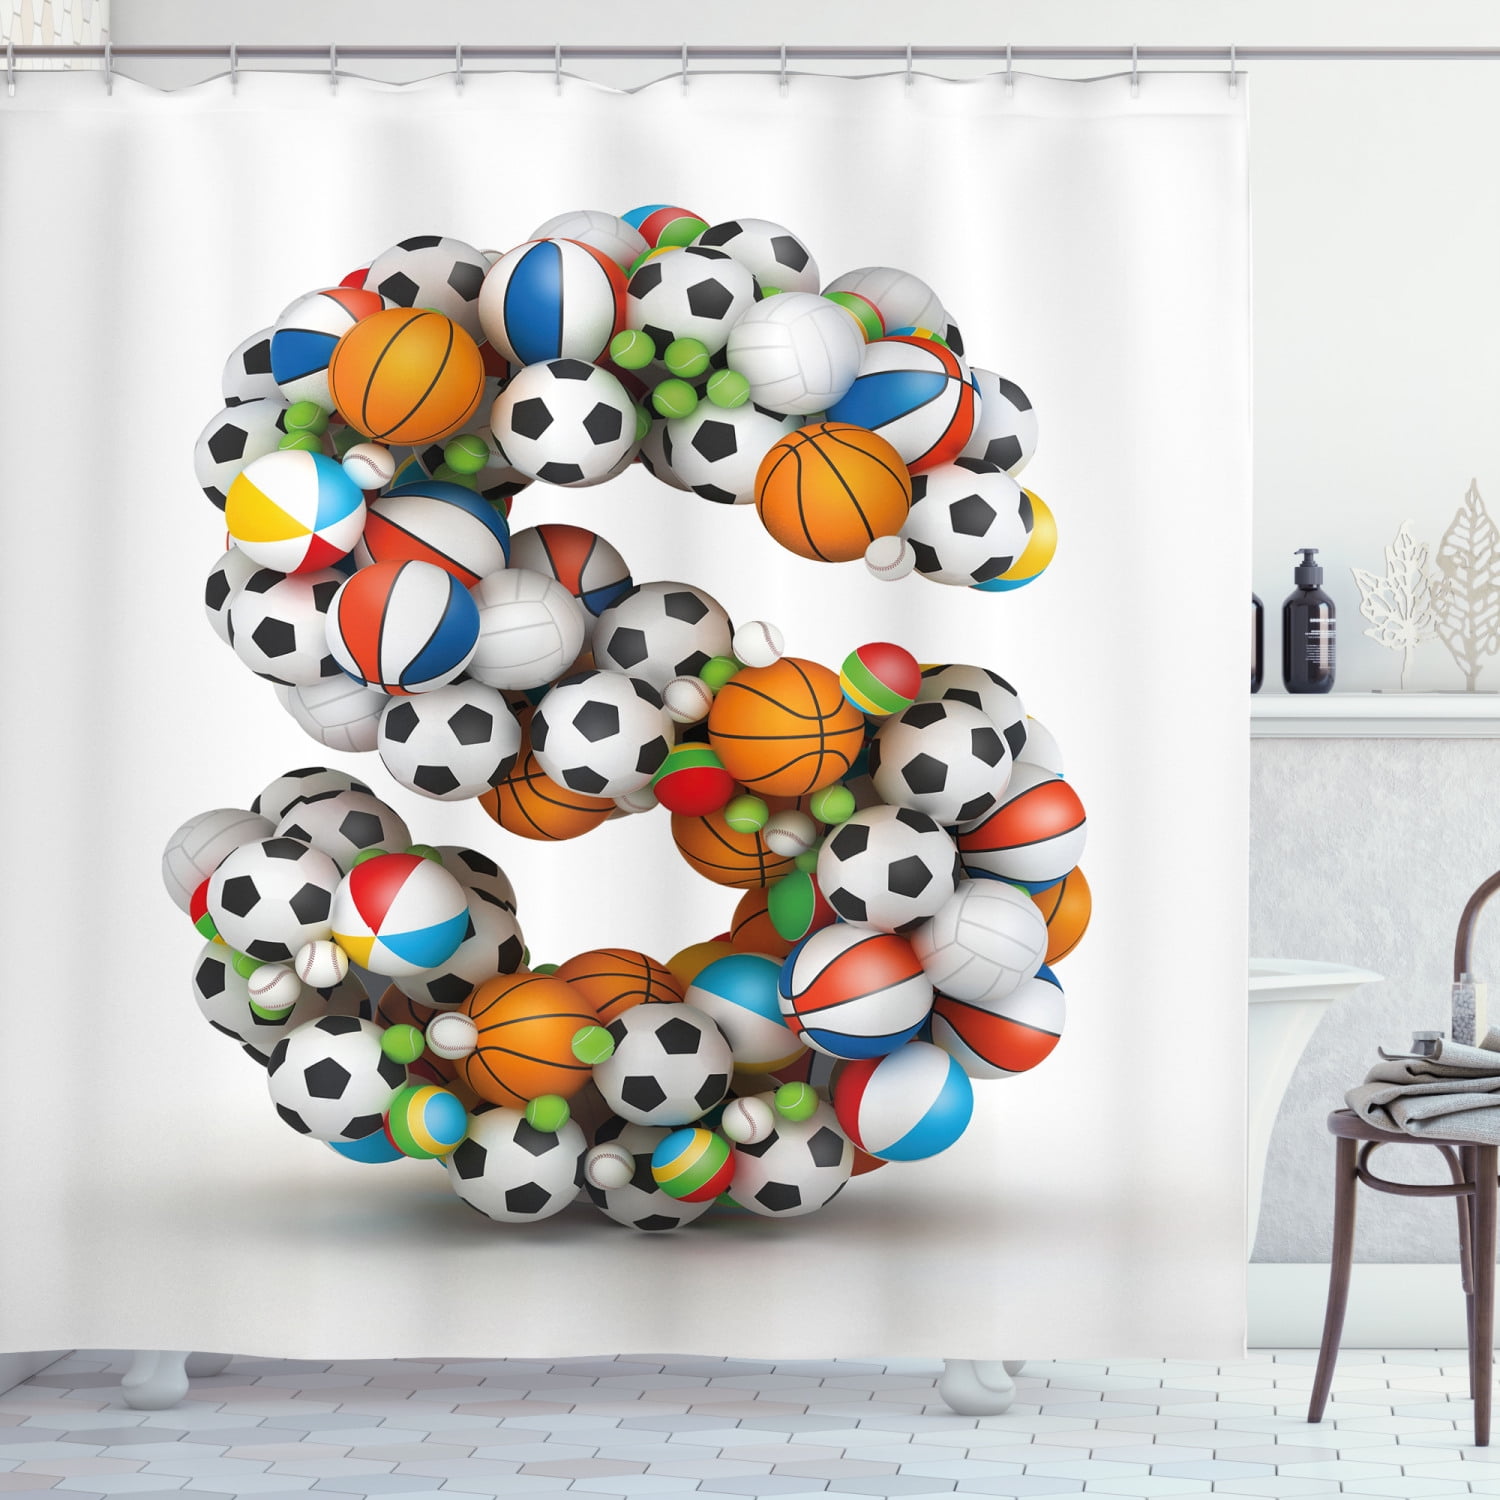 70 Inches Fabric Bathroom Decor Set with Hooks Kids Shower Curtain by Ambesonne Young Boy Playing Football in the Stadium Athlete Sports Soccer Championship Graphic Multicolor